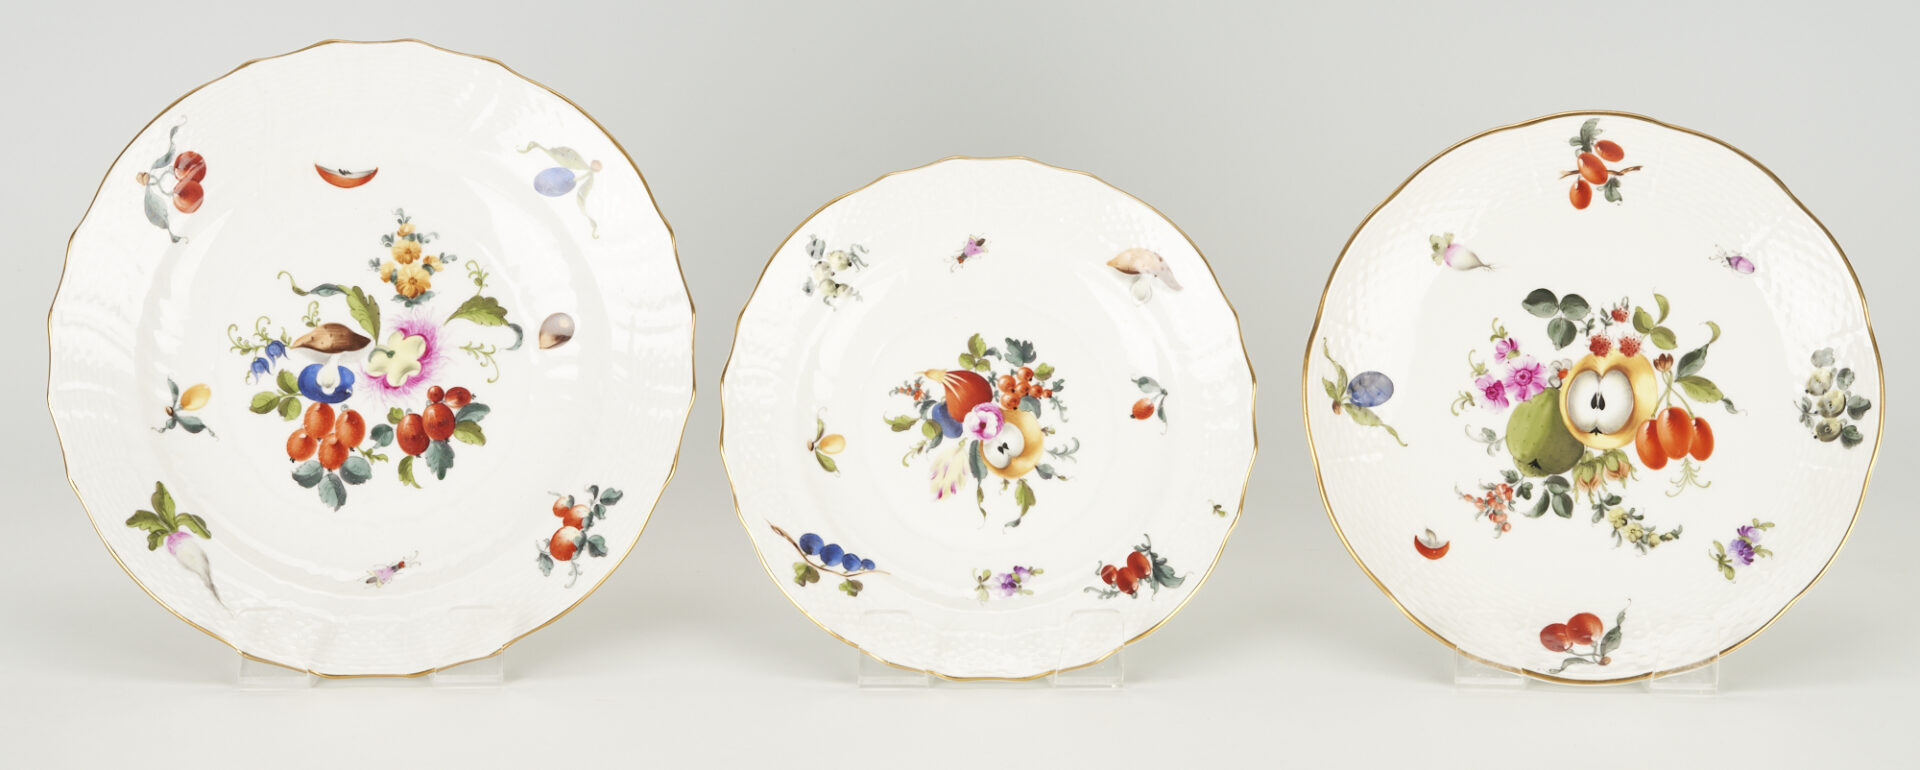 Lot 217: 132 Pieces of Herend Porcelain, Fruits & Flowers Pattern